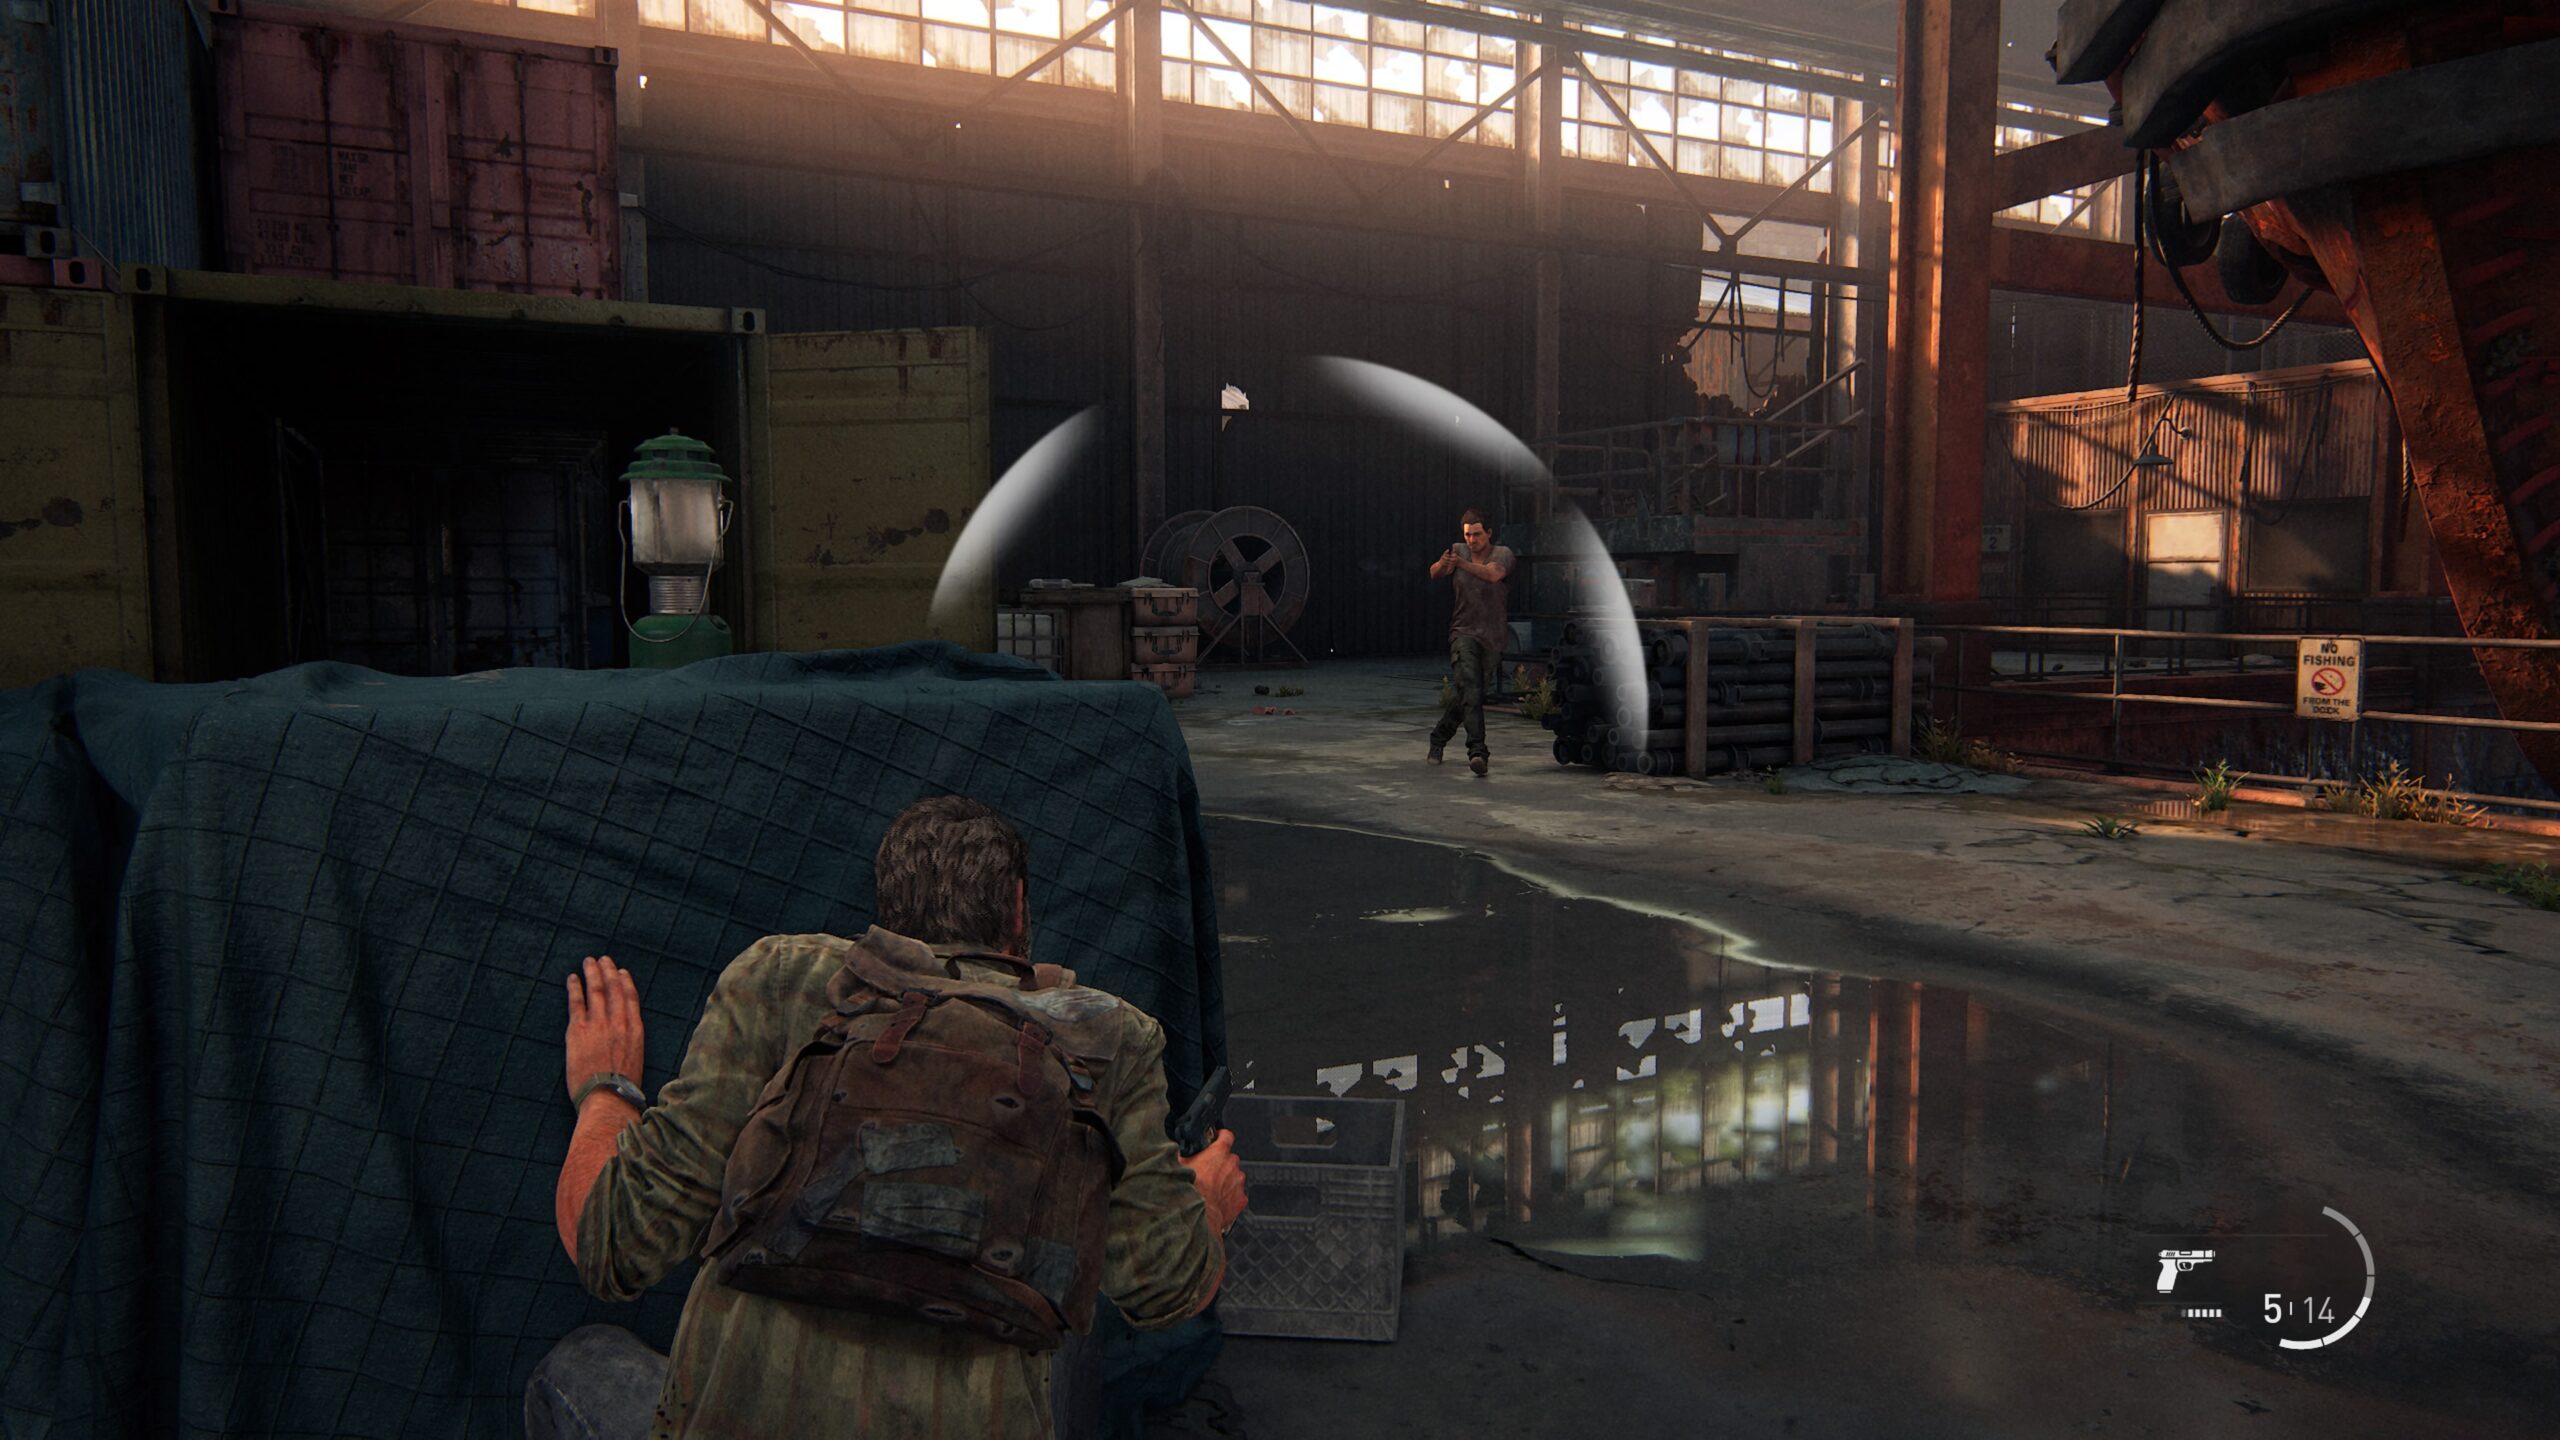 No, The Last of Us PC requirements aren't changing